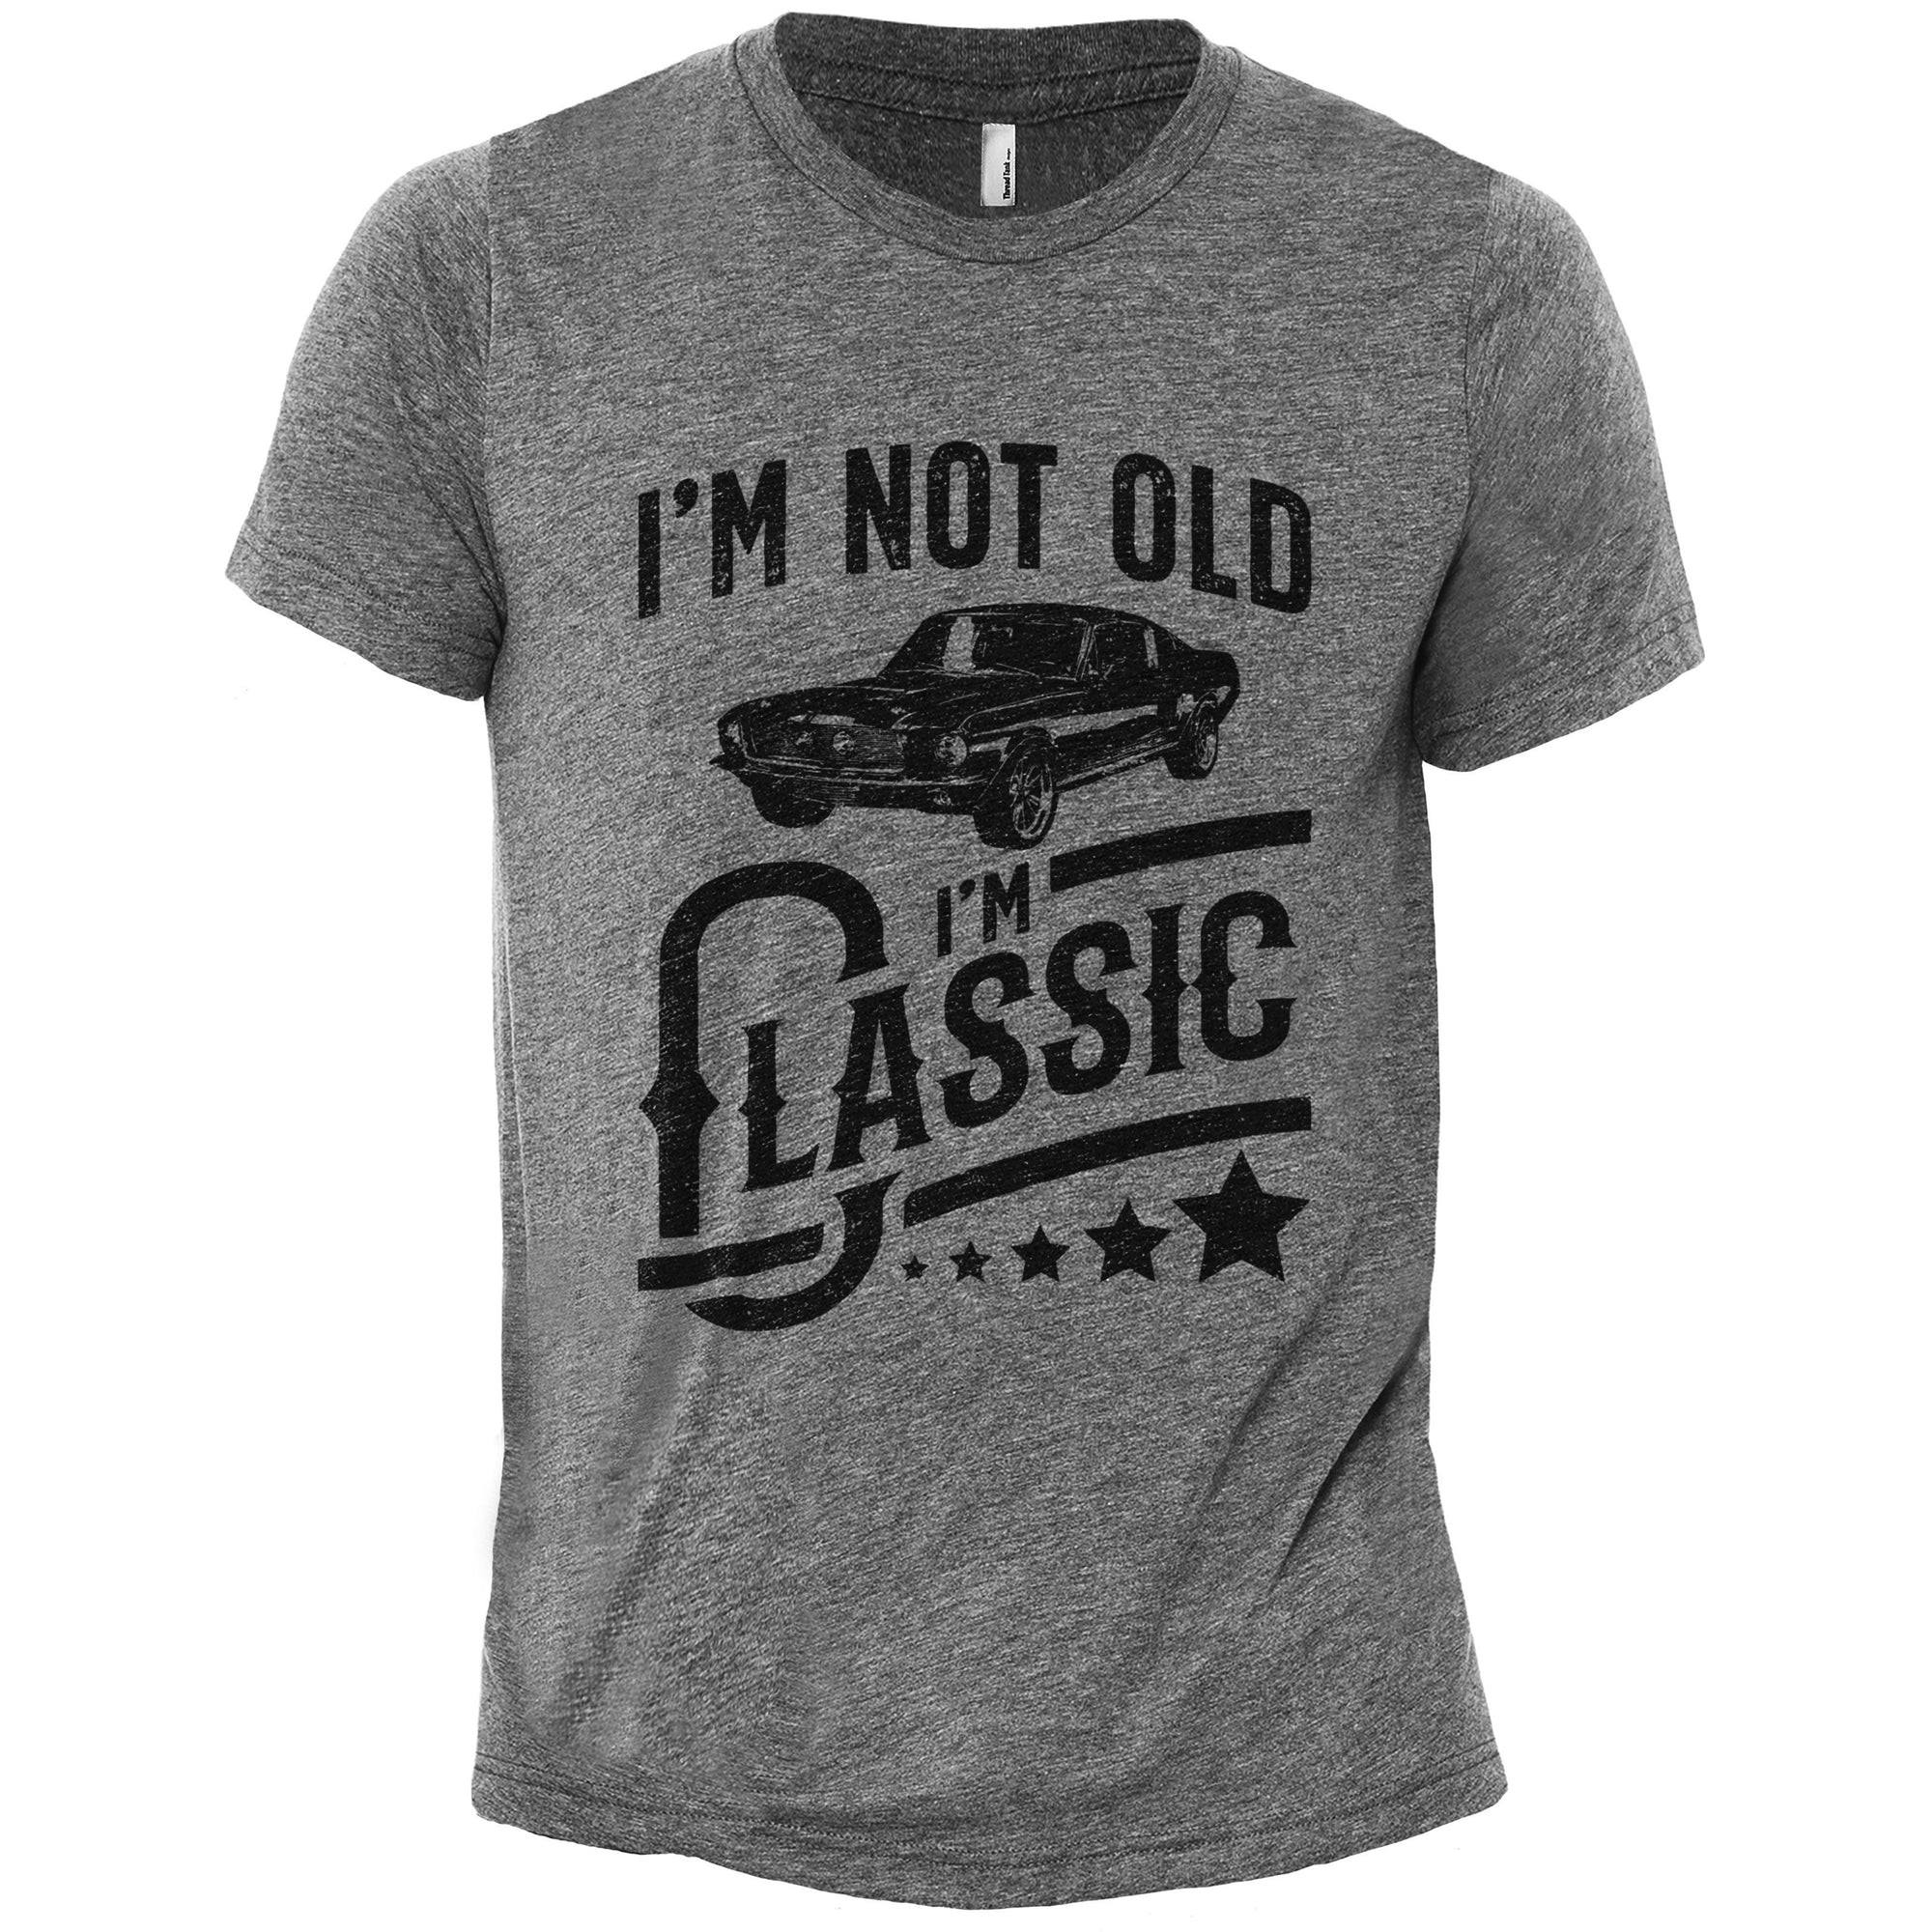 I'm Not Old I'm Classic - Stories You Can Wear